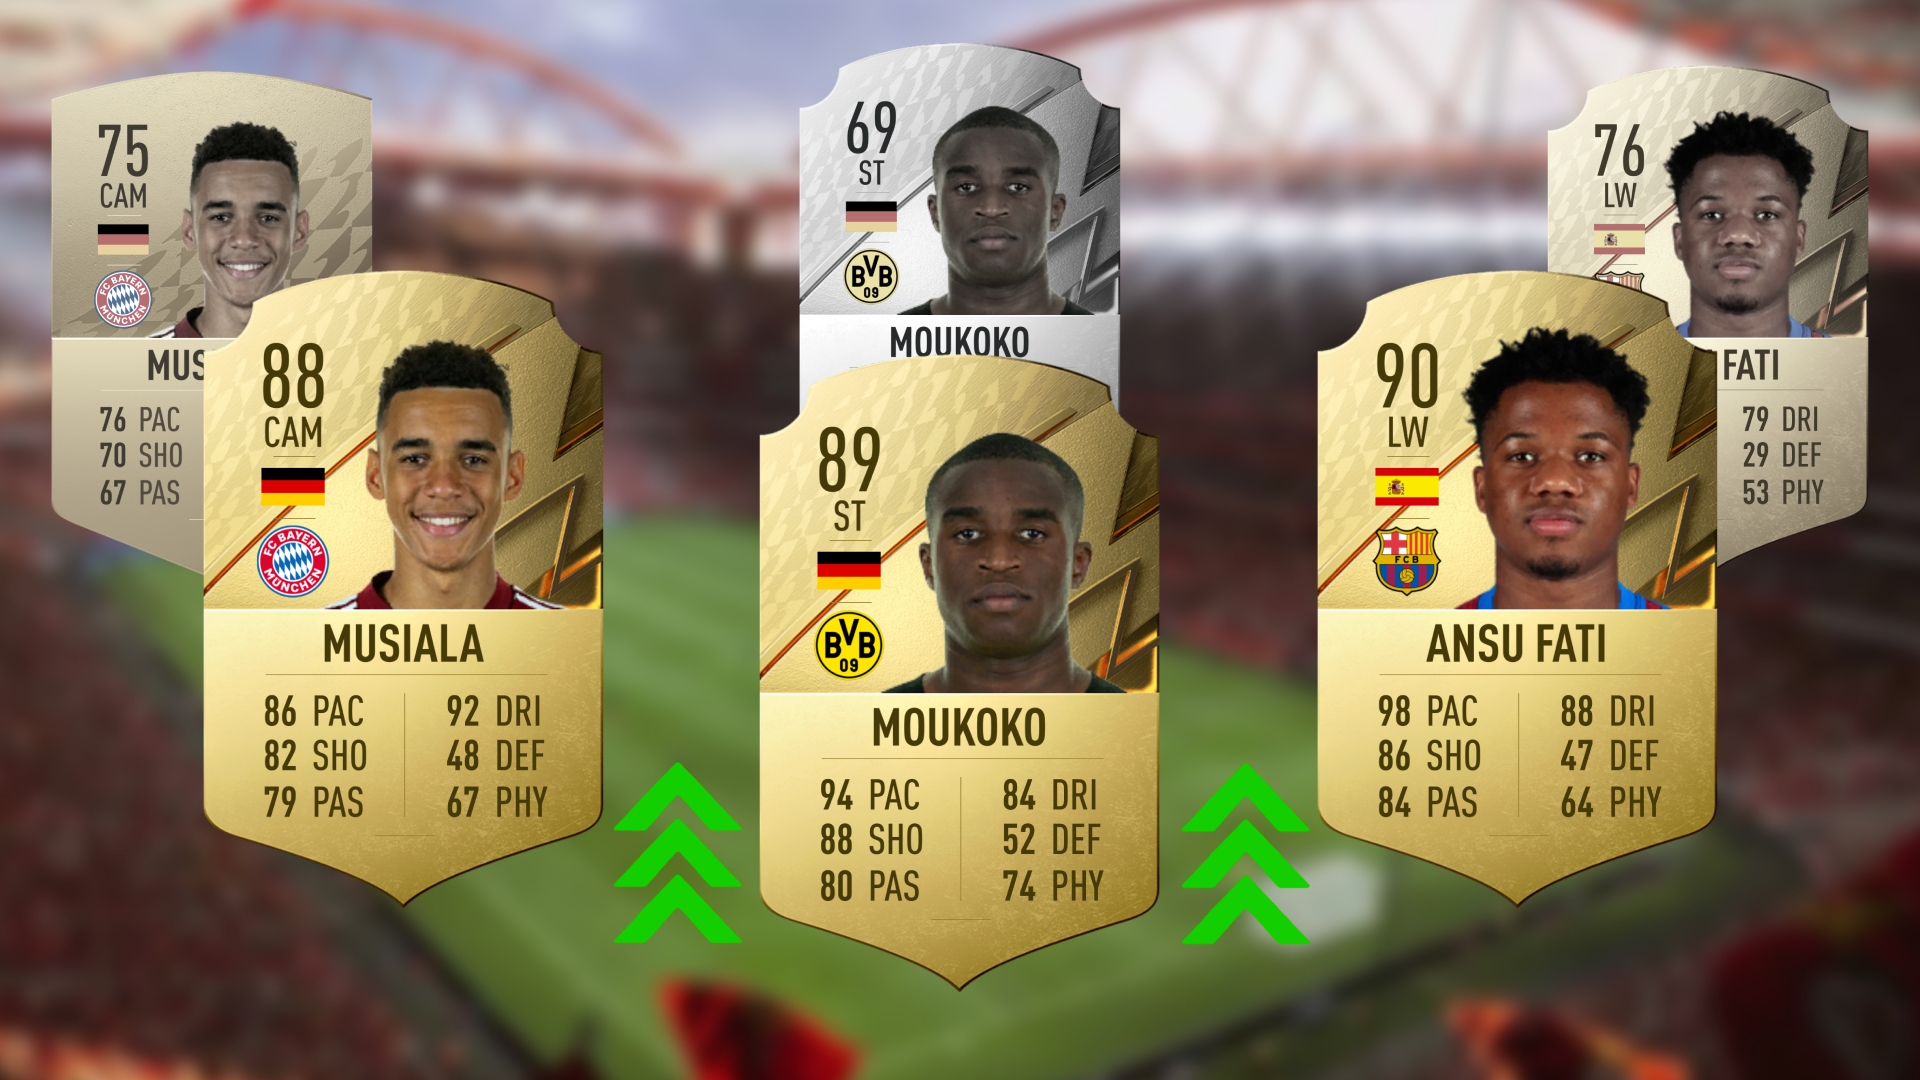 FIFA 22 wingers, best RM, LM, RW and LW to buy in Career Mode